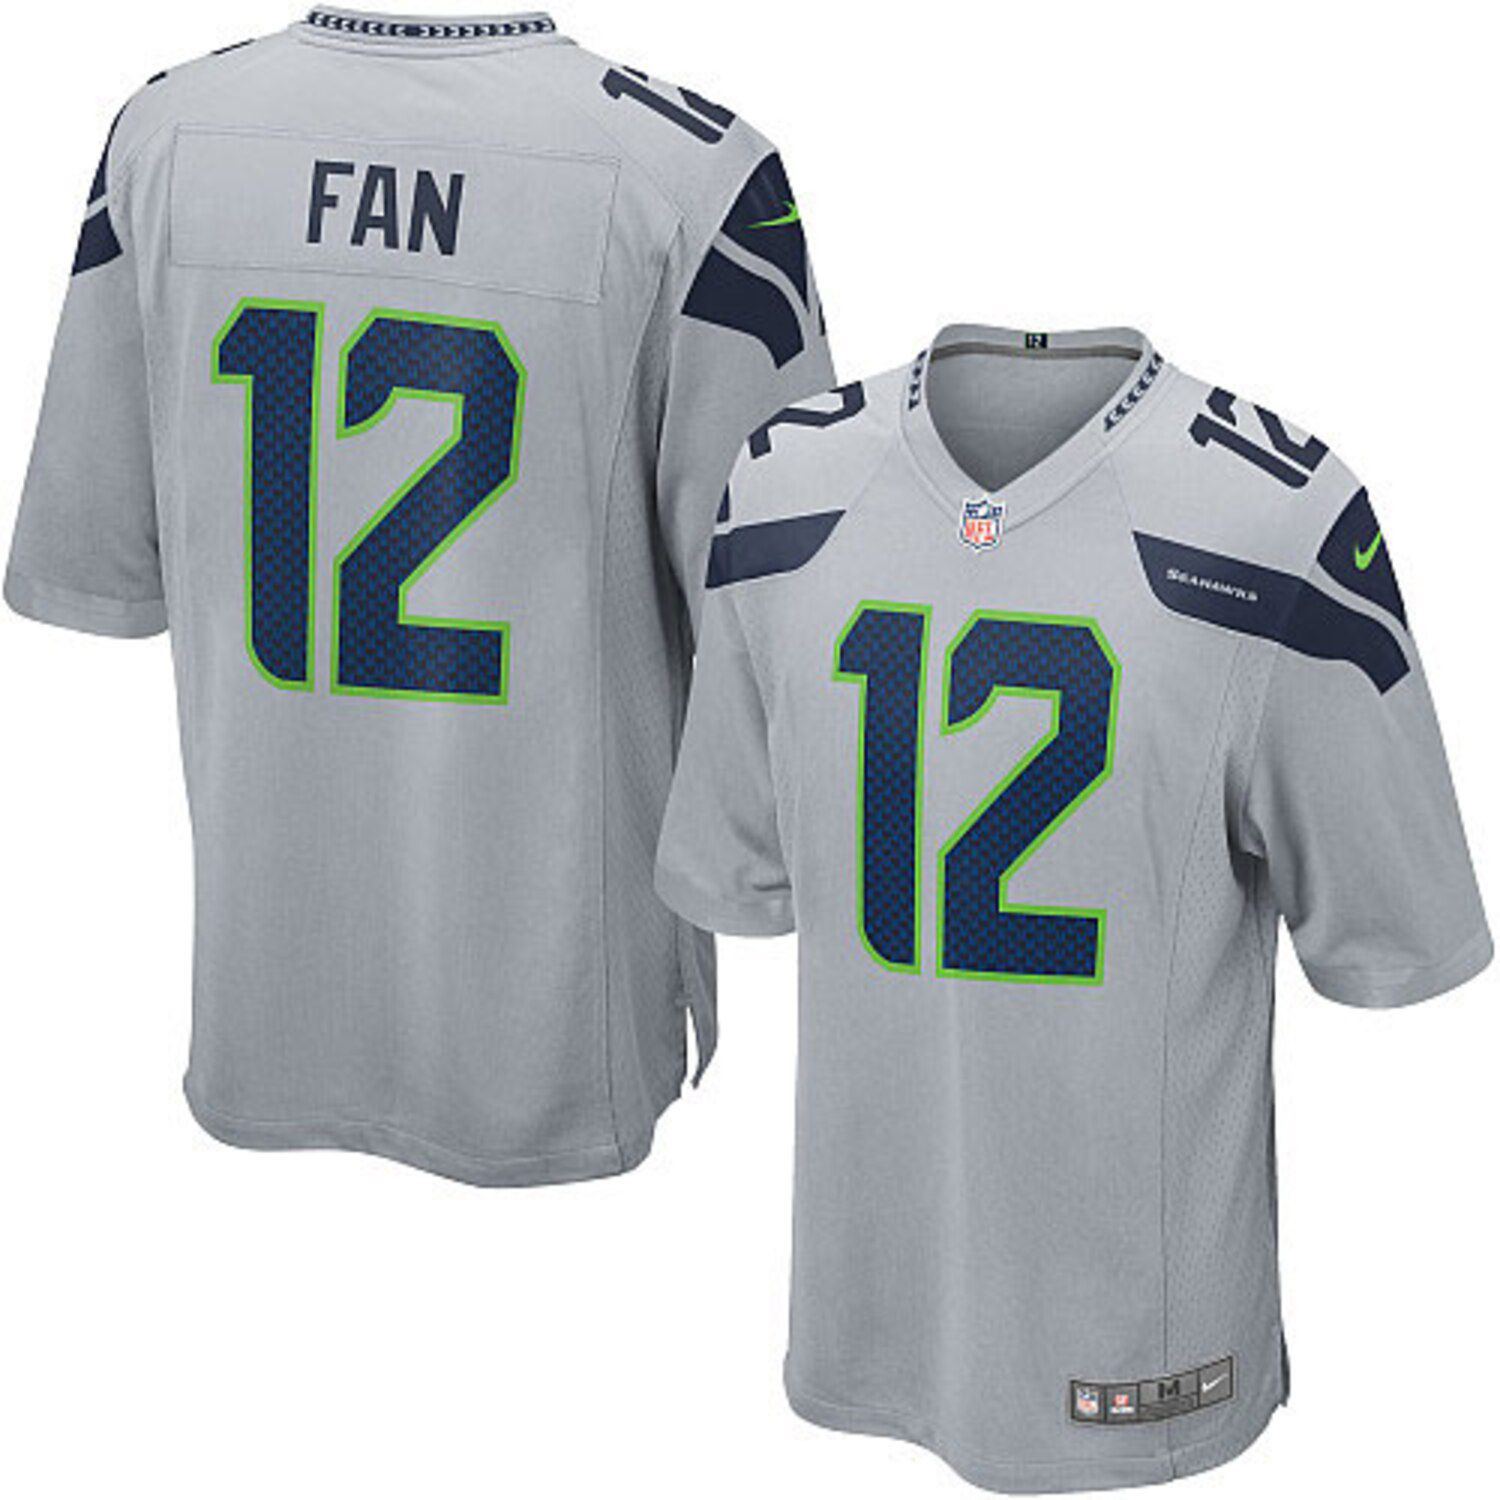 Seattle Seahawks Youth 12s Game Jersey 